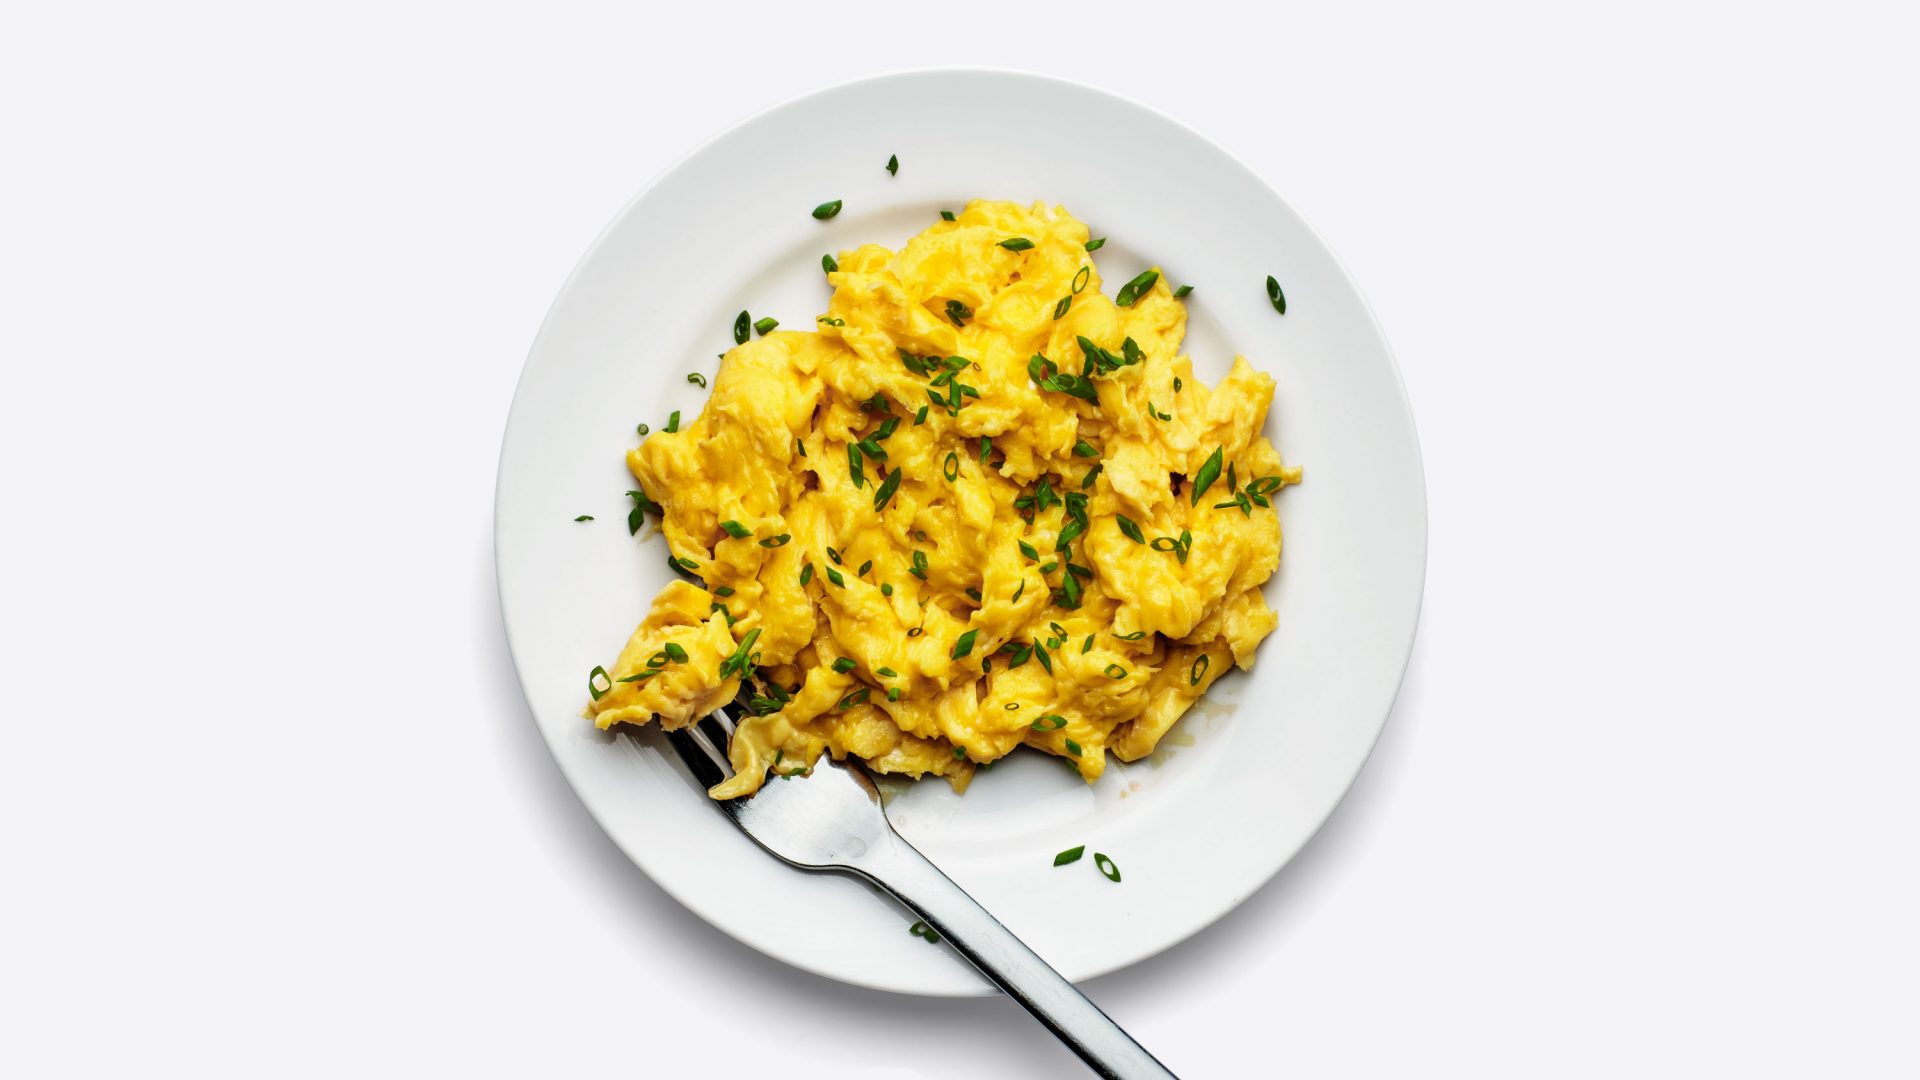 A Clear-prick Trick For Creamier Scrambled Eggs